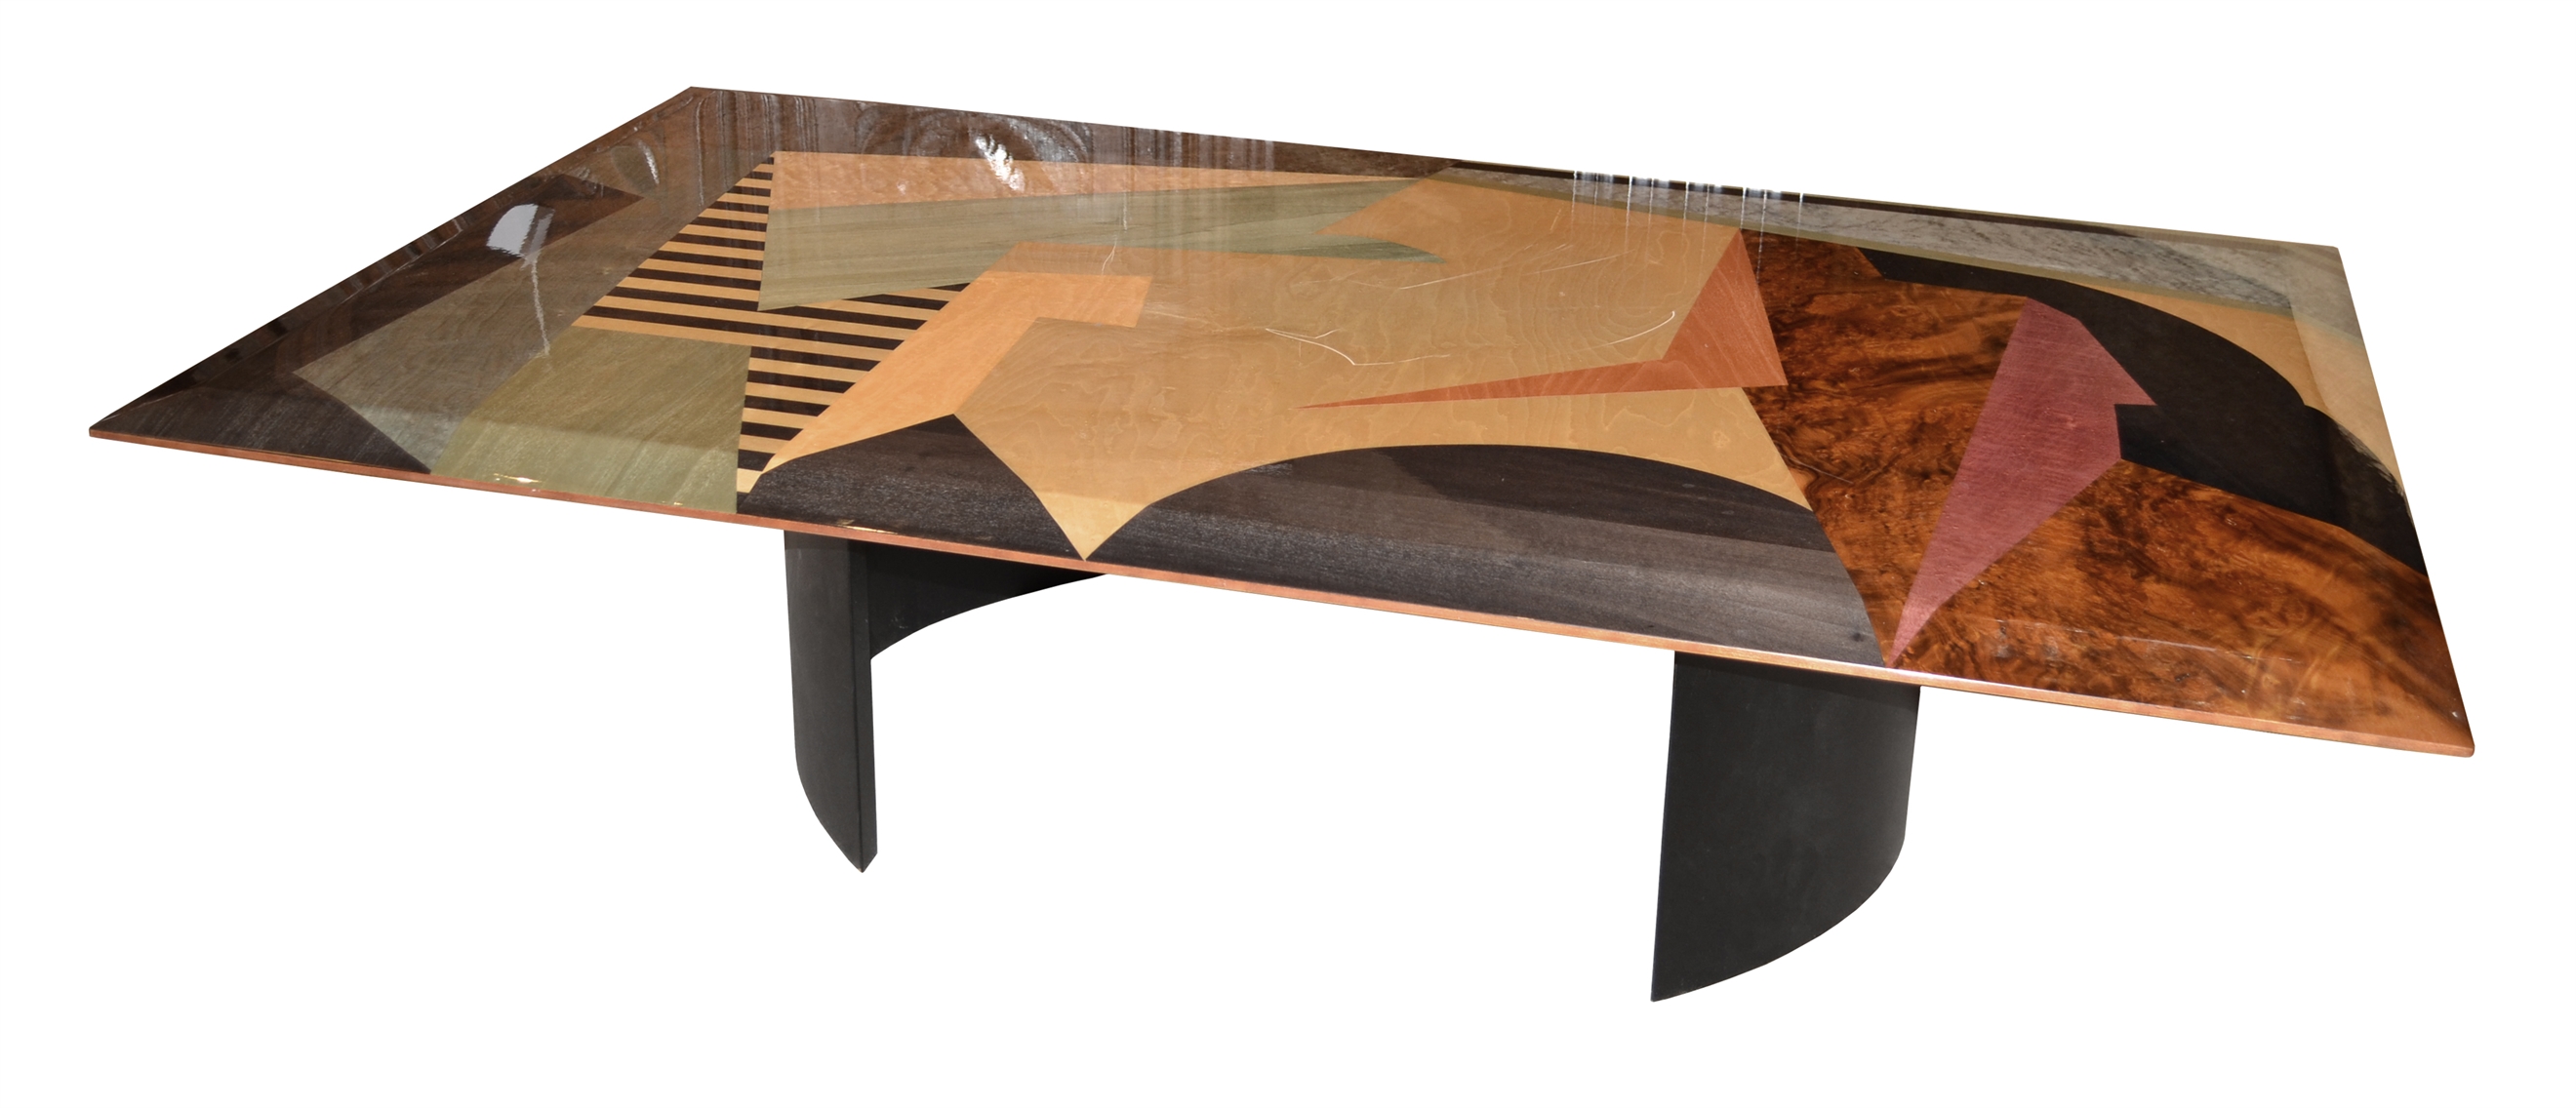 MB/3112 - Rectangular Multi-Colored Coffee Table